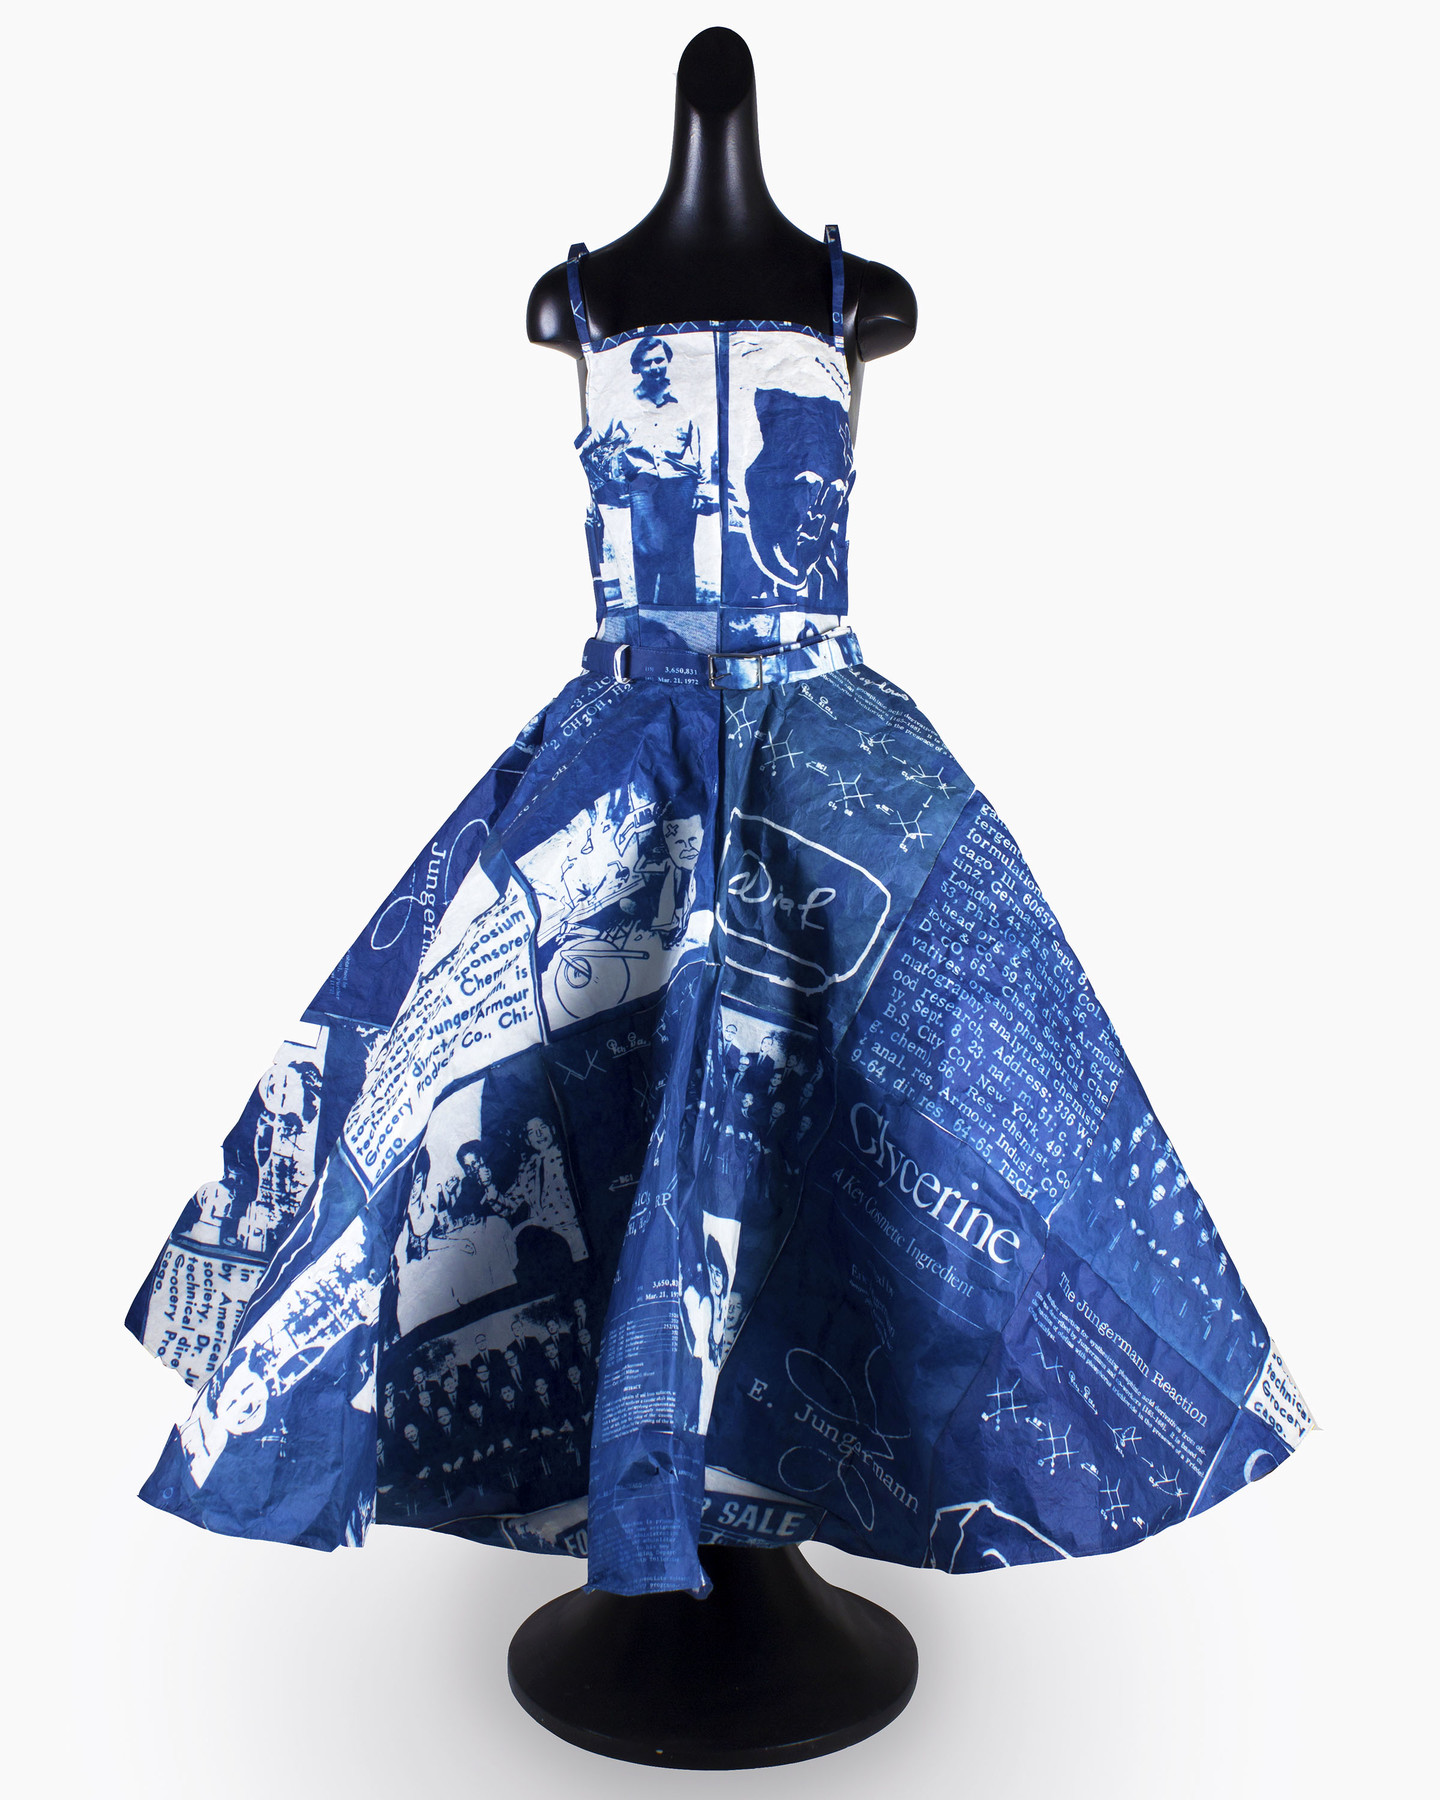 A sleeveless rich blue full-length gown placed on a headless black mannequin with rounded base. The dress has white text and images printed on the surface.